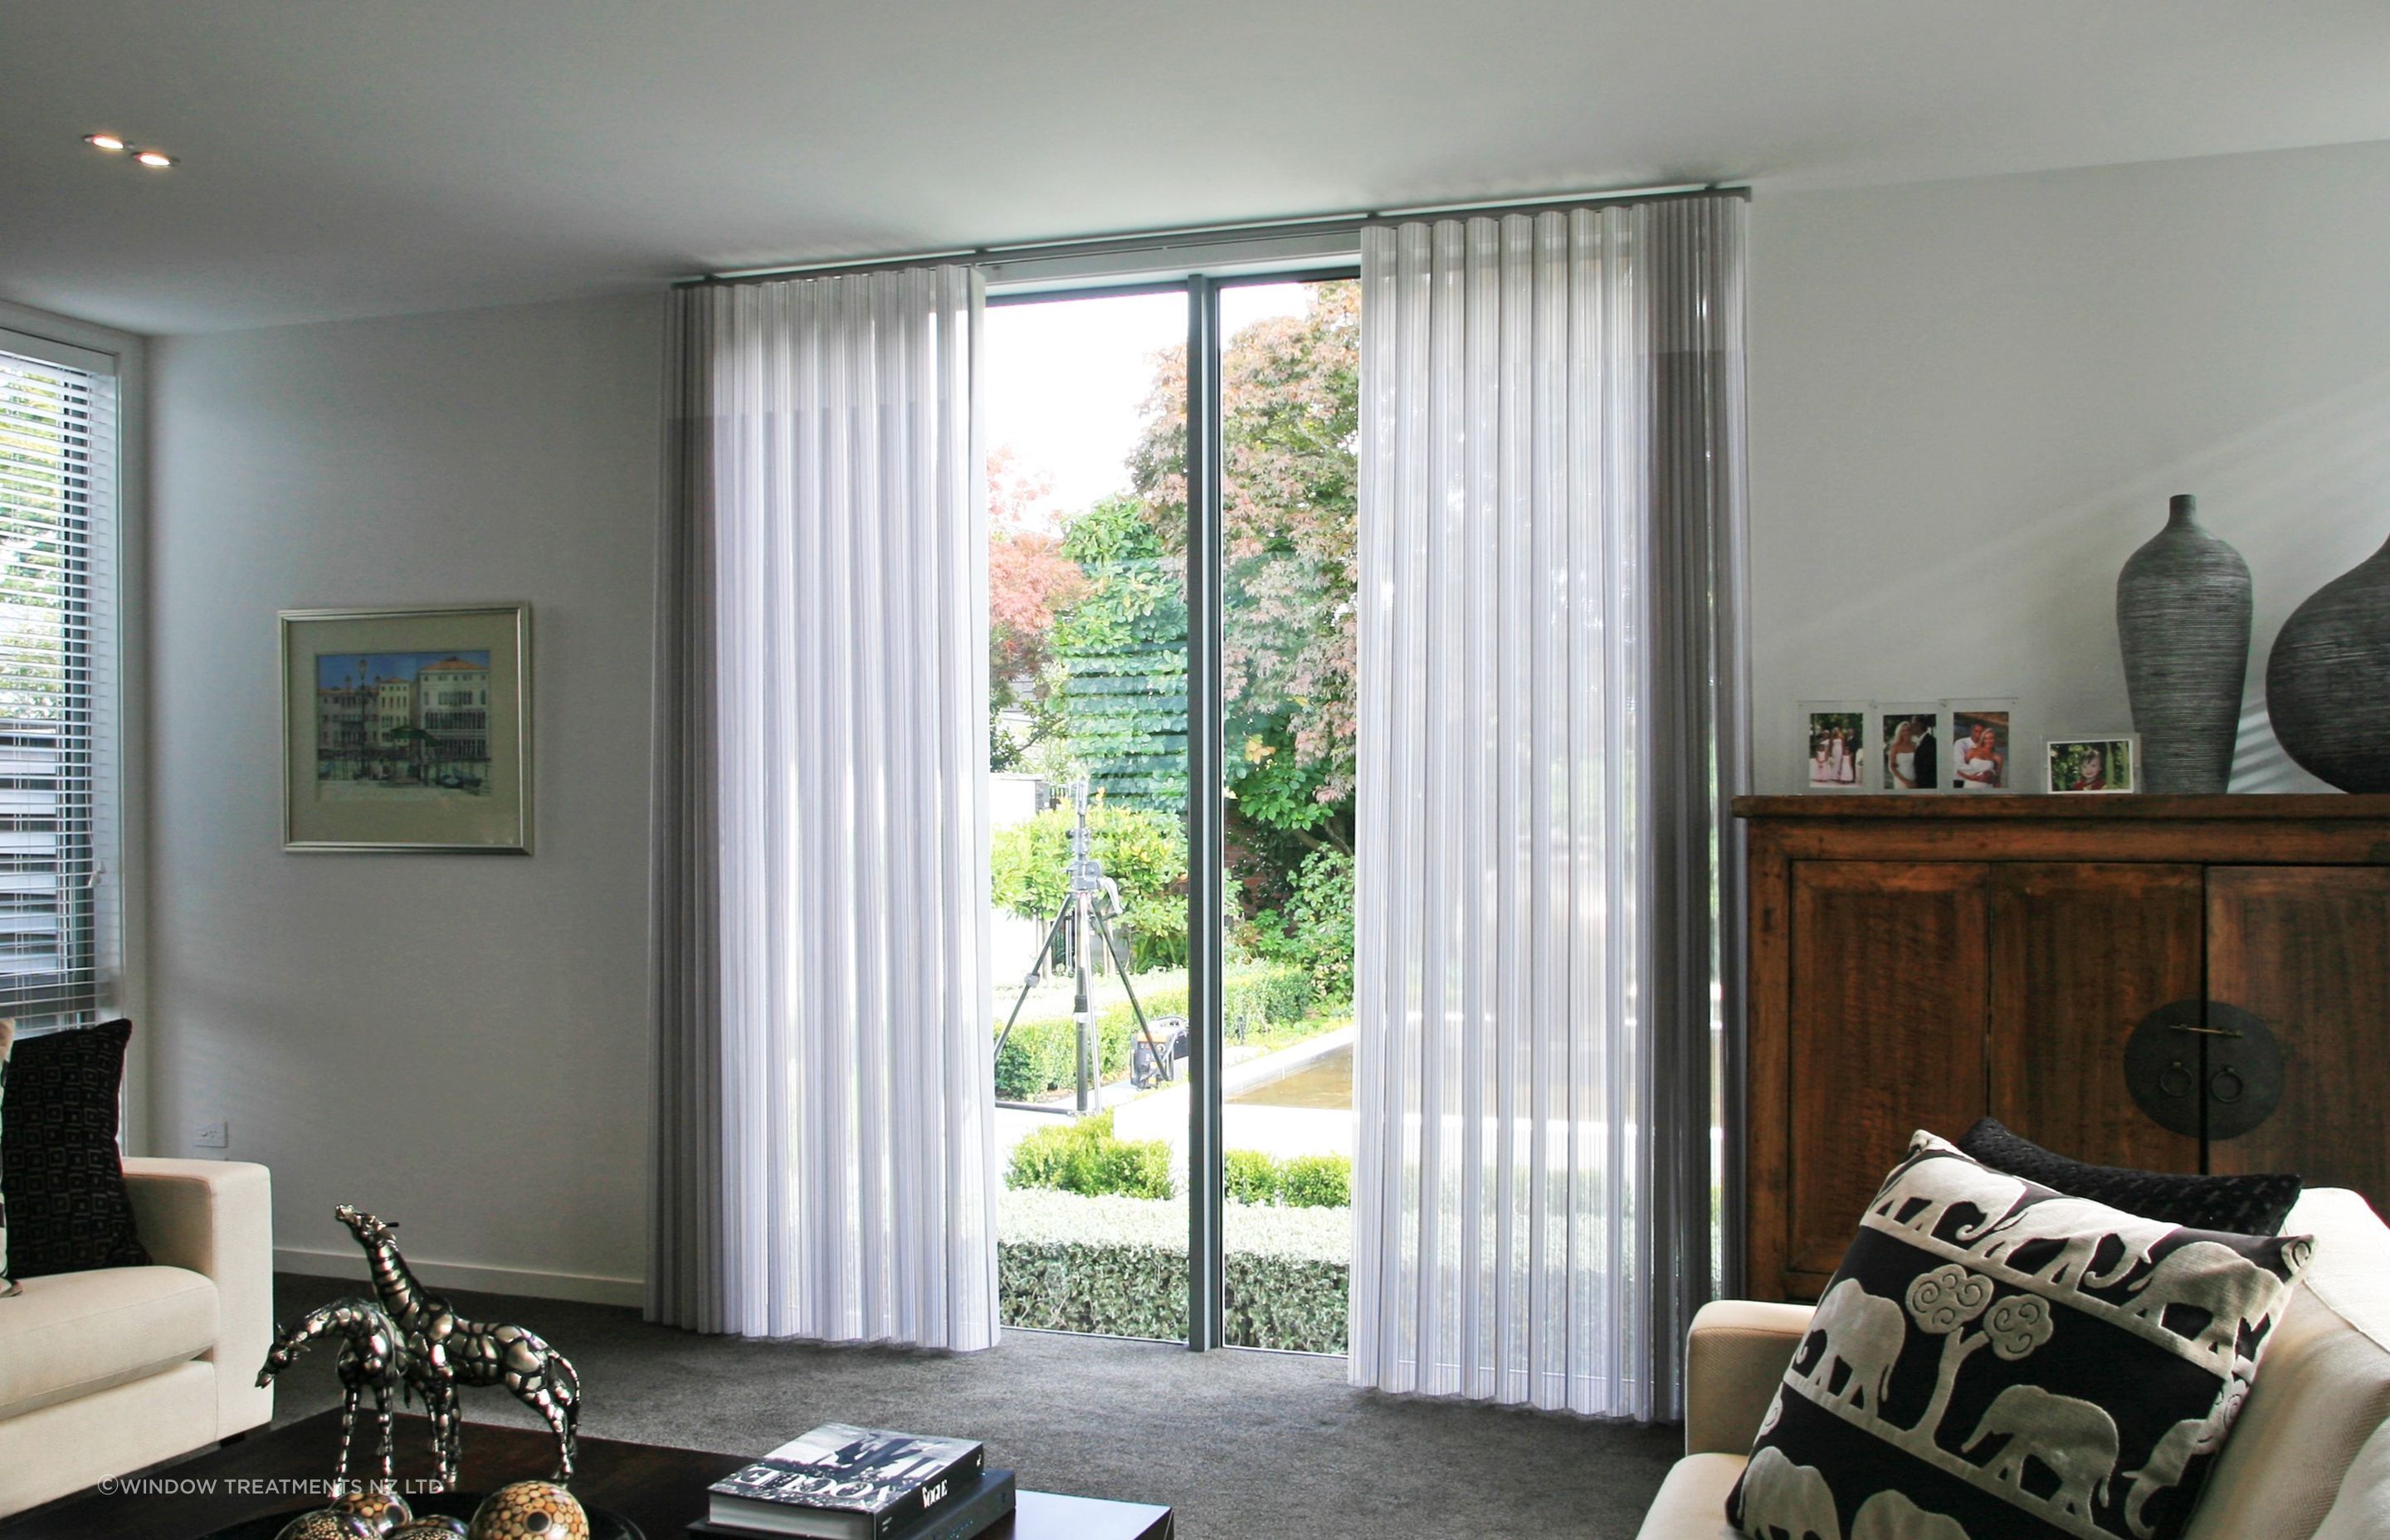 Curtains or blinds or something that's both, like the innovative Mystique Curtain/Blind.